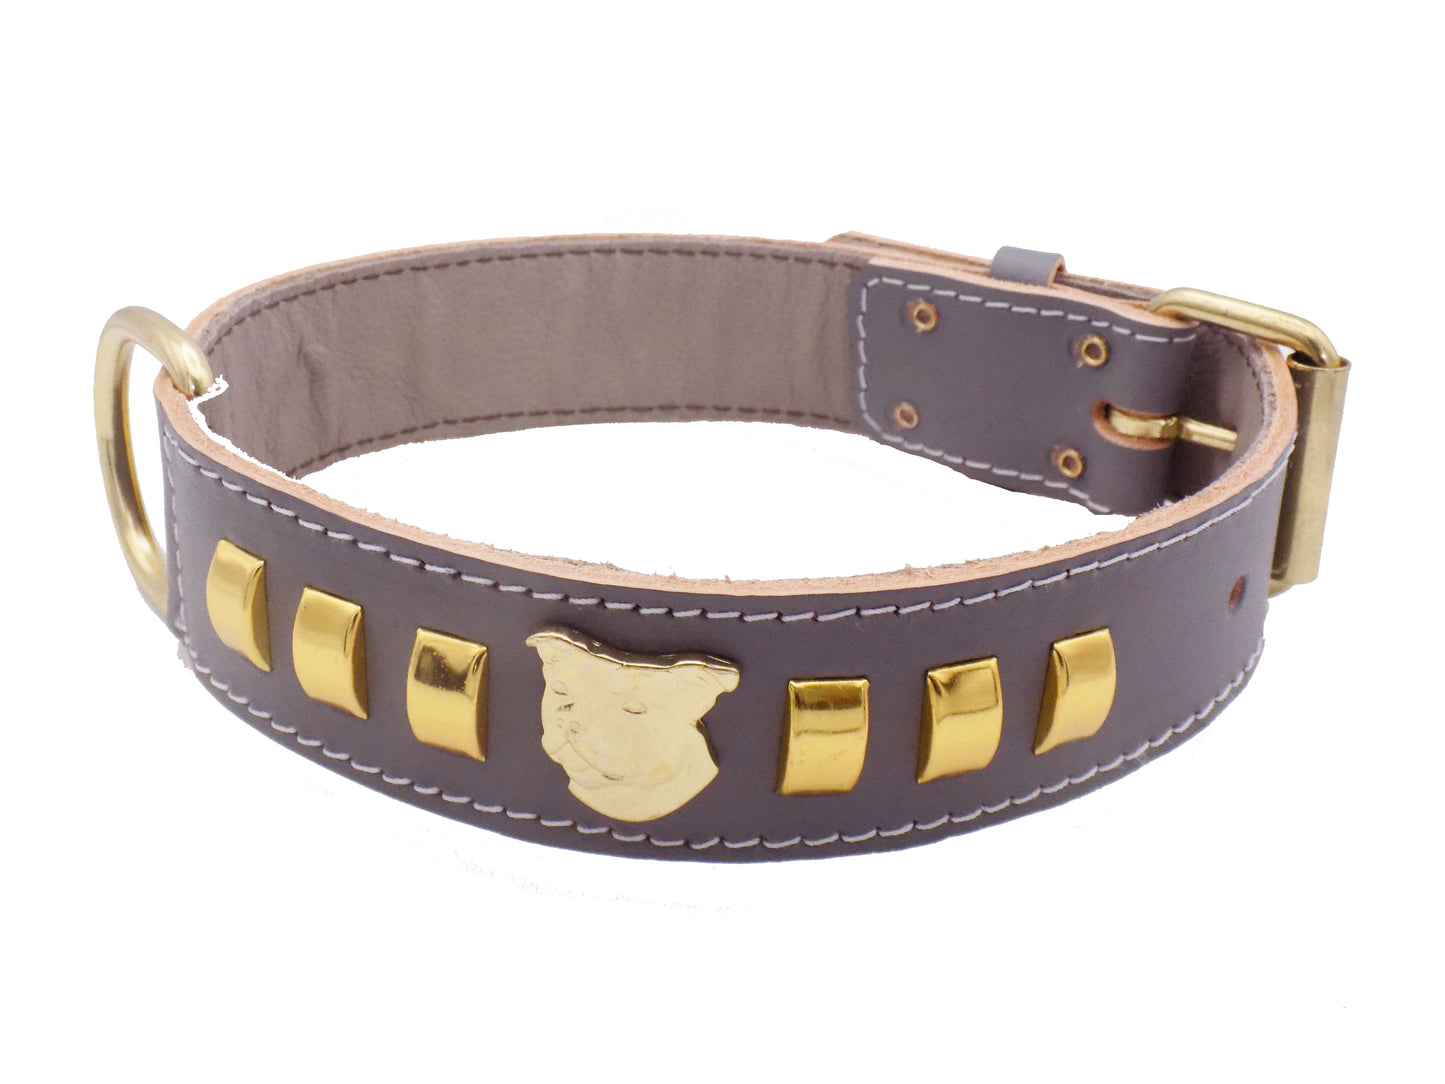 1.5" Staffy Leather Dog Collar with Gold Decorative Design and Staffordshire Bull Terrier Badge